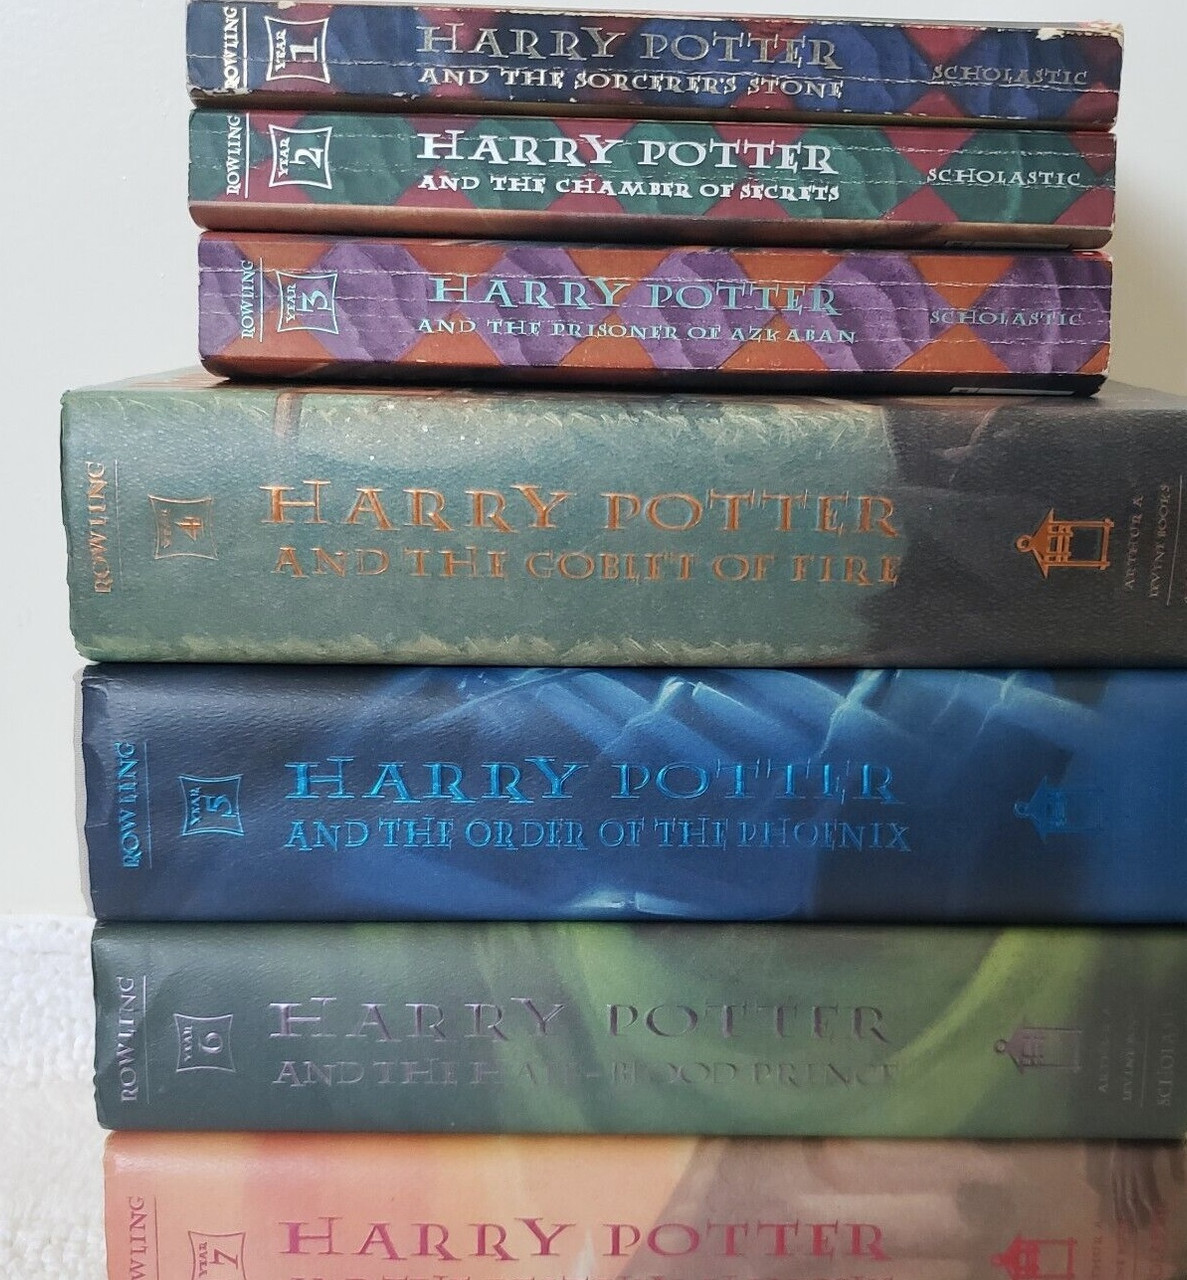 Harry Potter Hardcover Boxed Set by J. K. Rowling